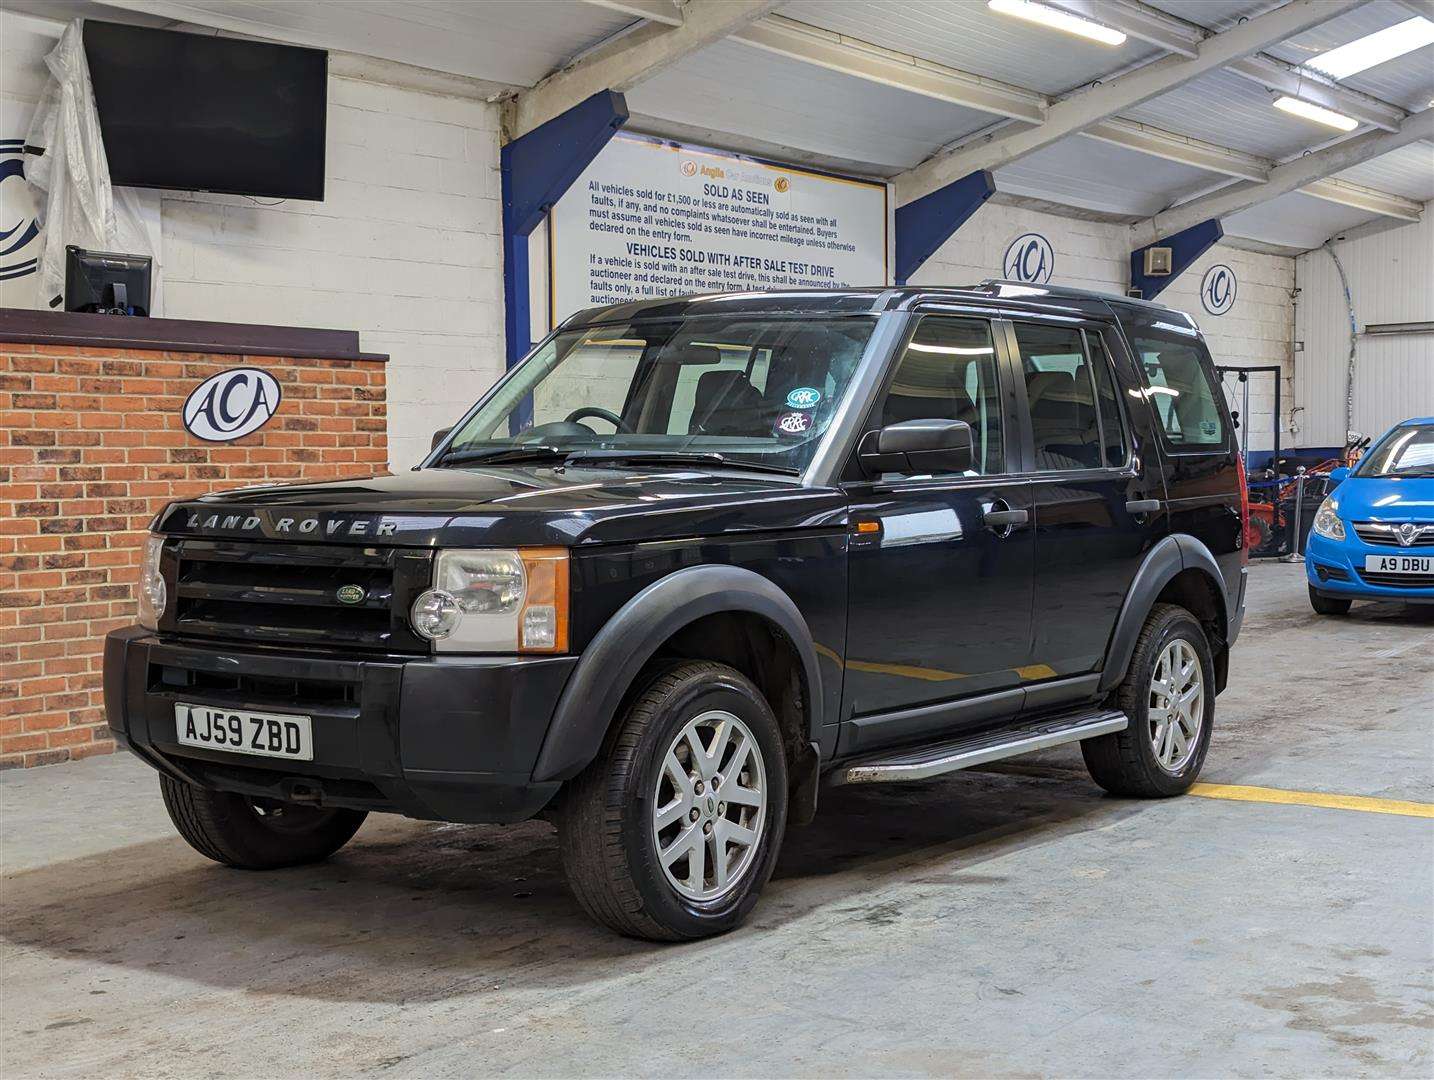 <p>2009 LAND ROVER DISCOVERY 3 MWB</p>